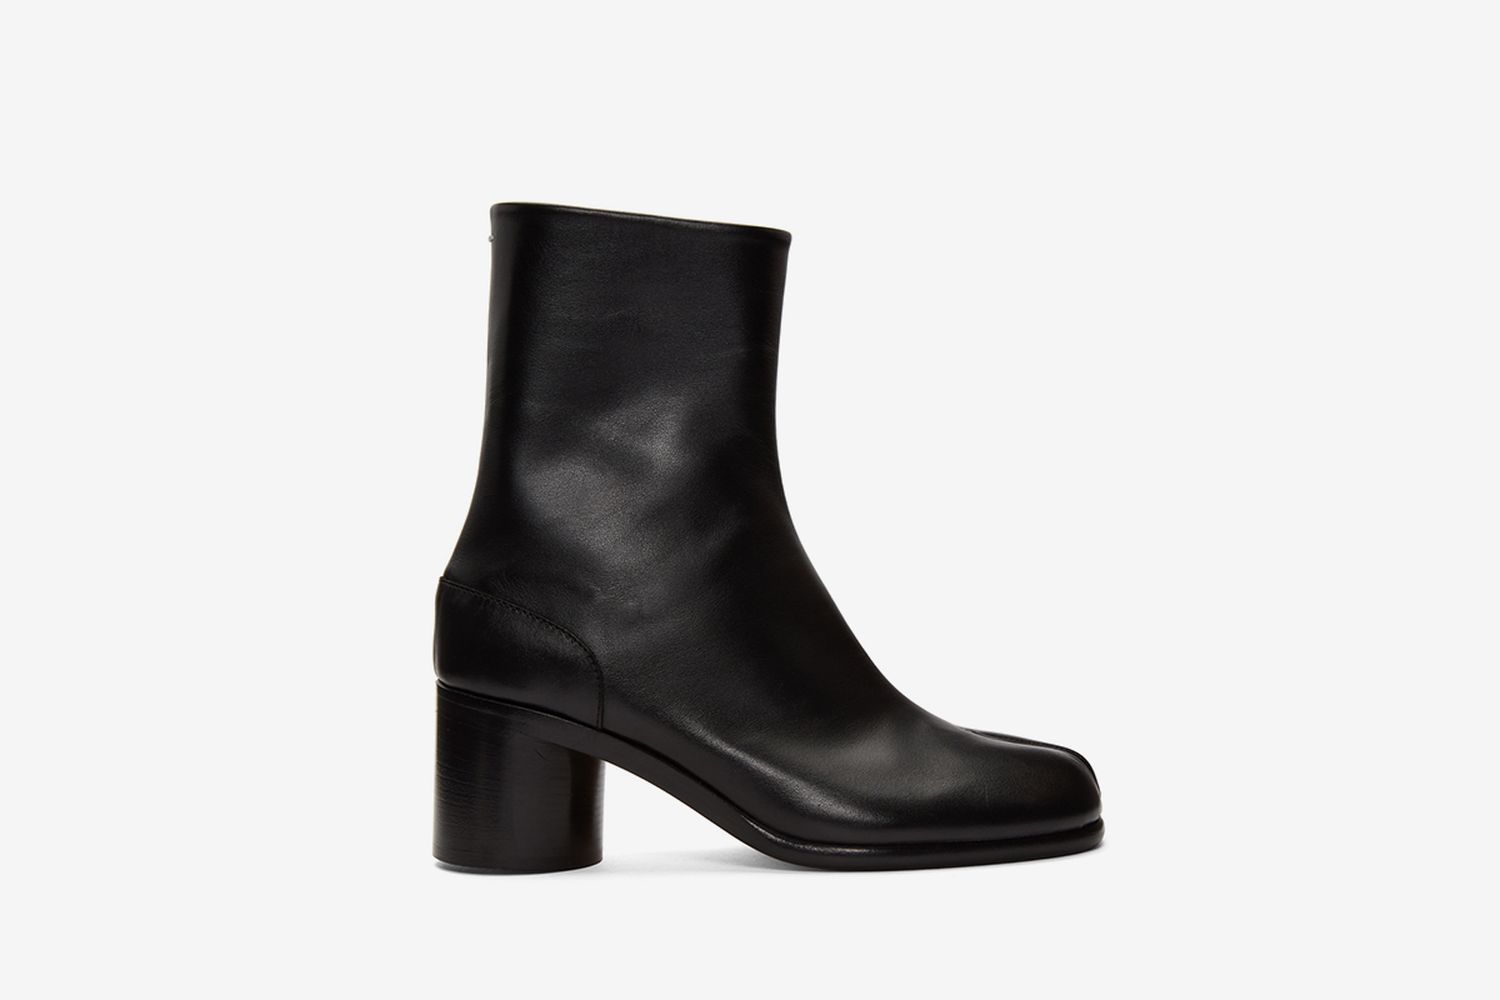 Are You Ready to Step Up Your Footwear in a Pair of Heeled Boots?